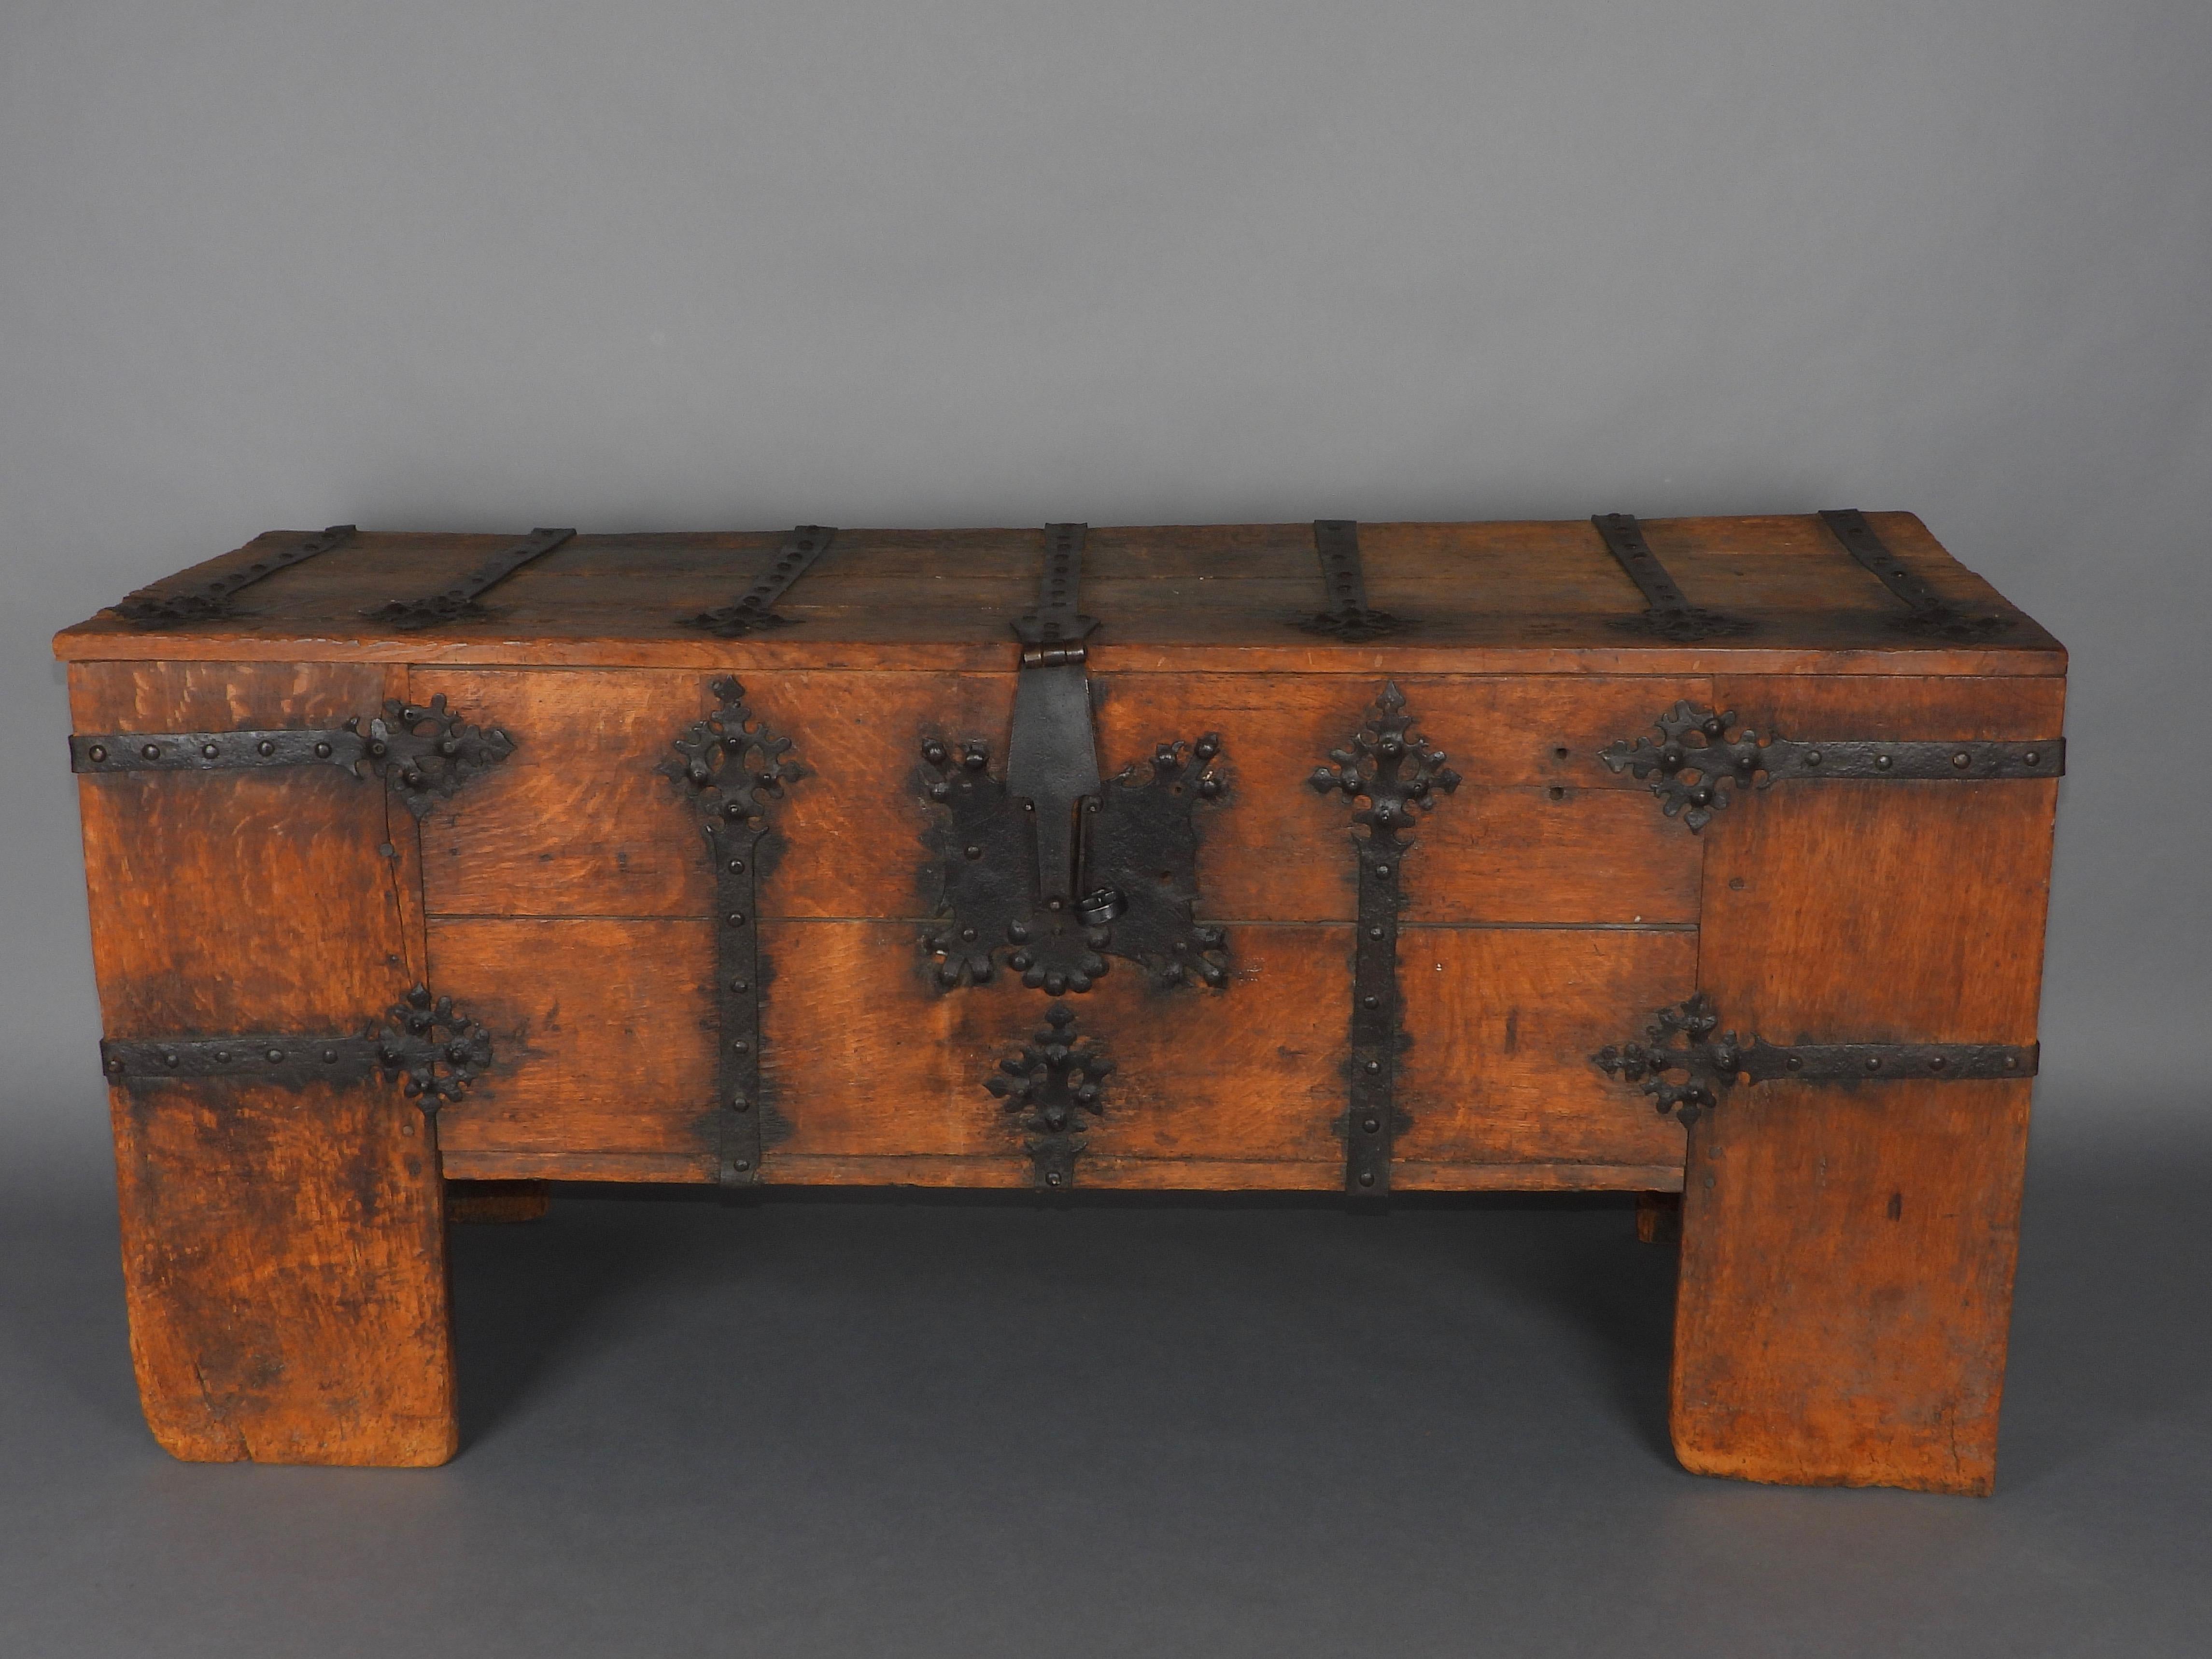 Rare Late Medieval 16th Century German Wrought Iron Oak Chest For Sale 10